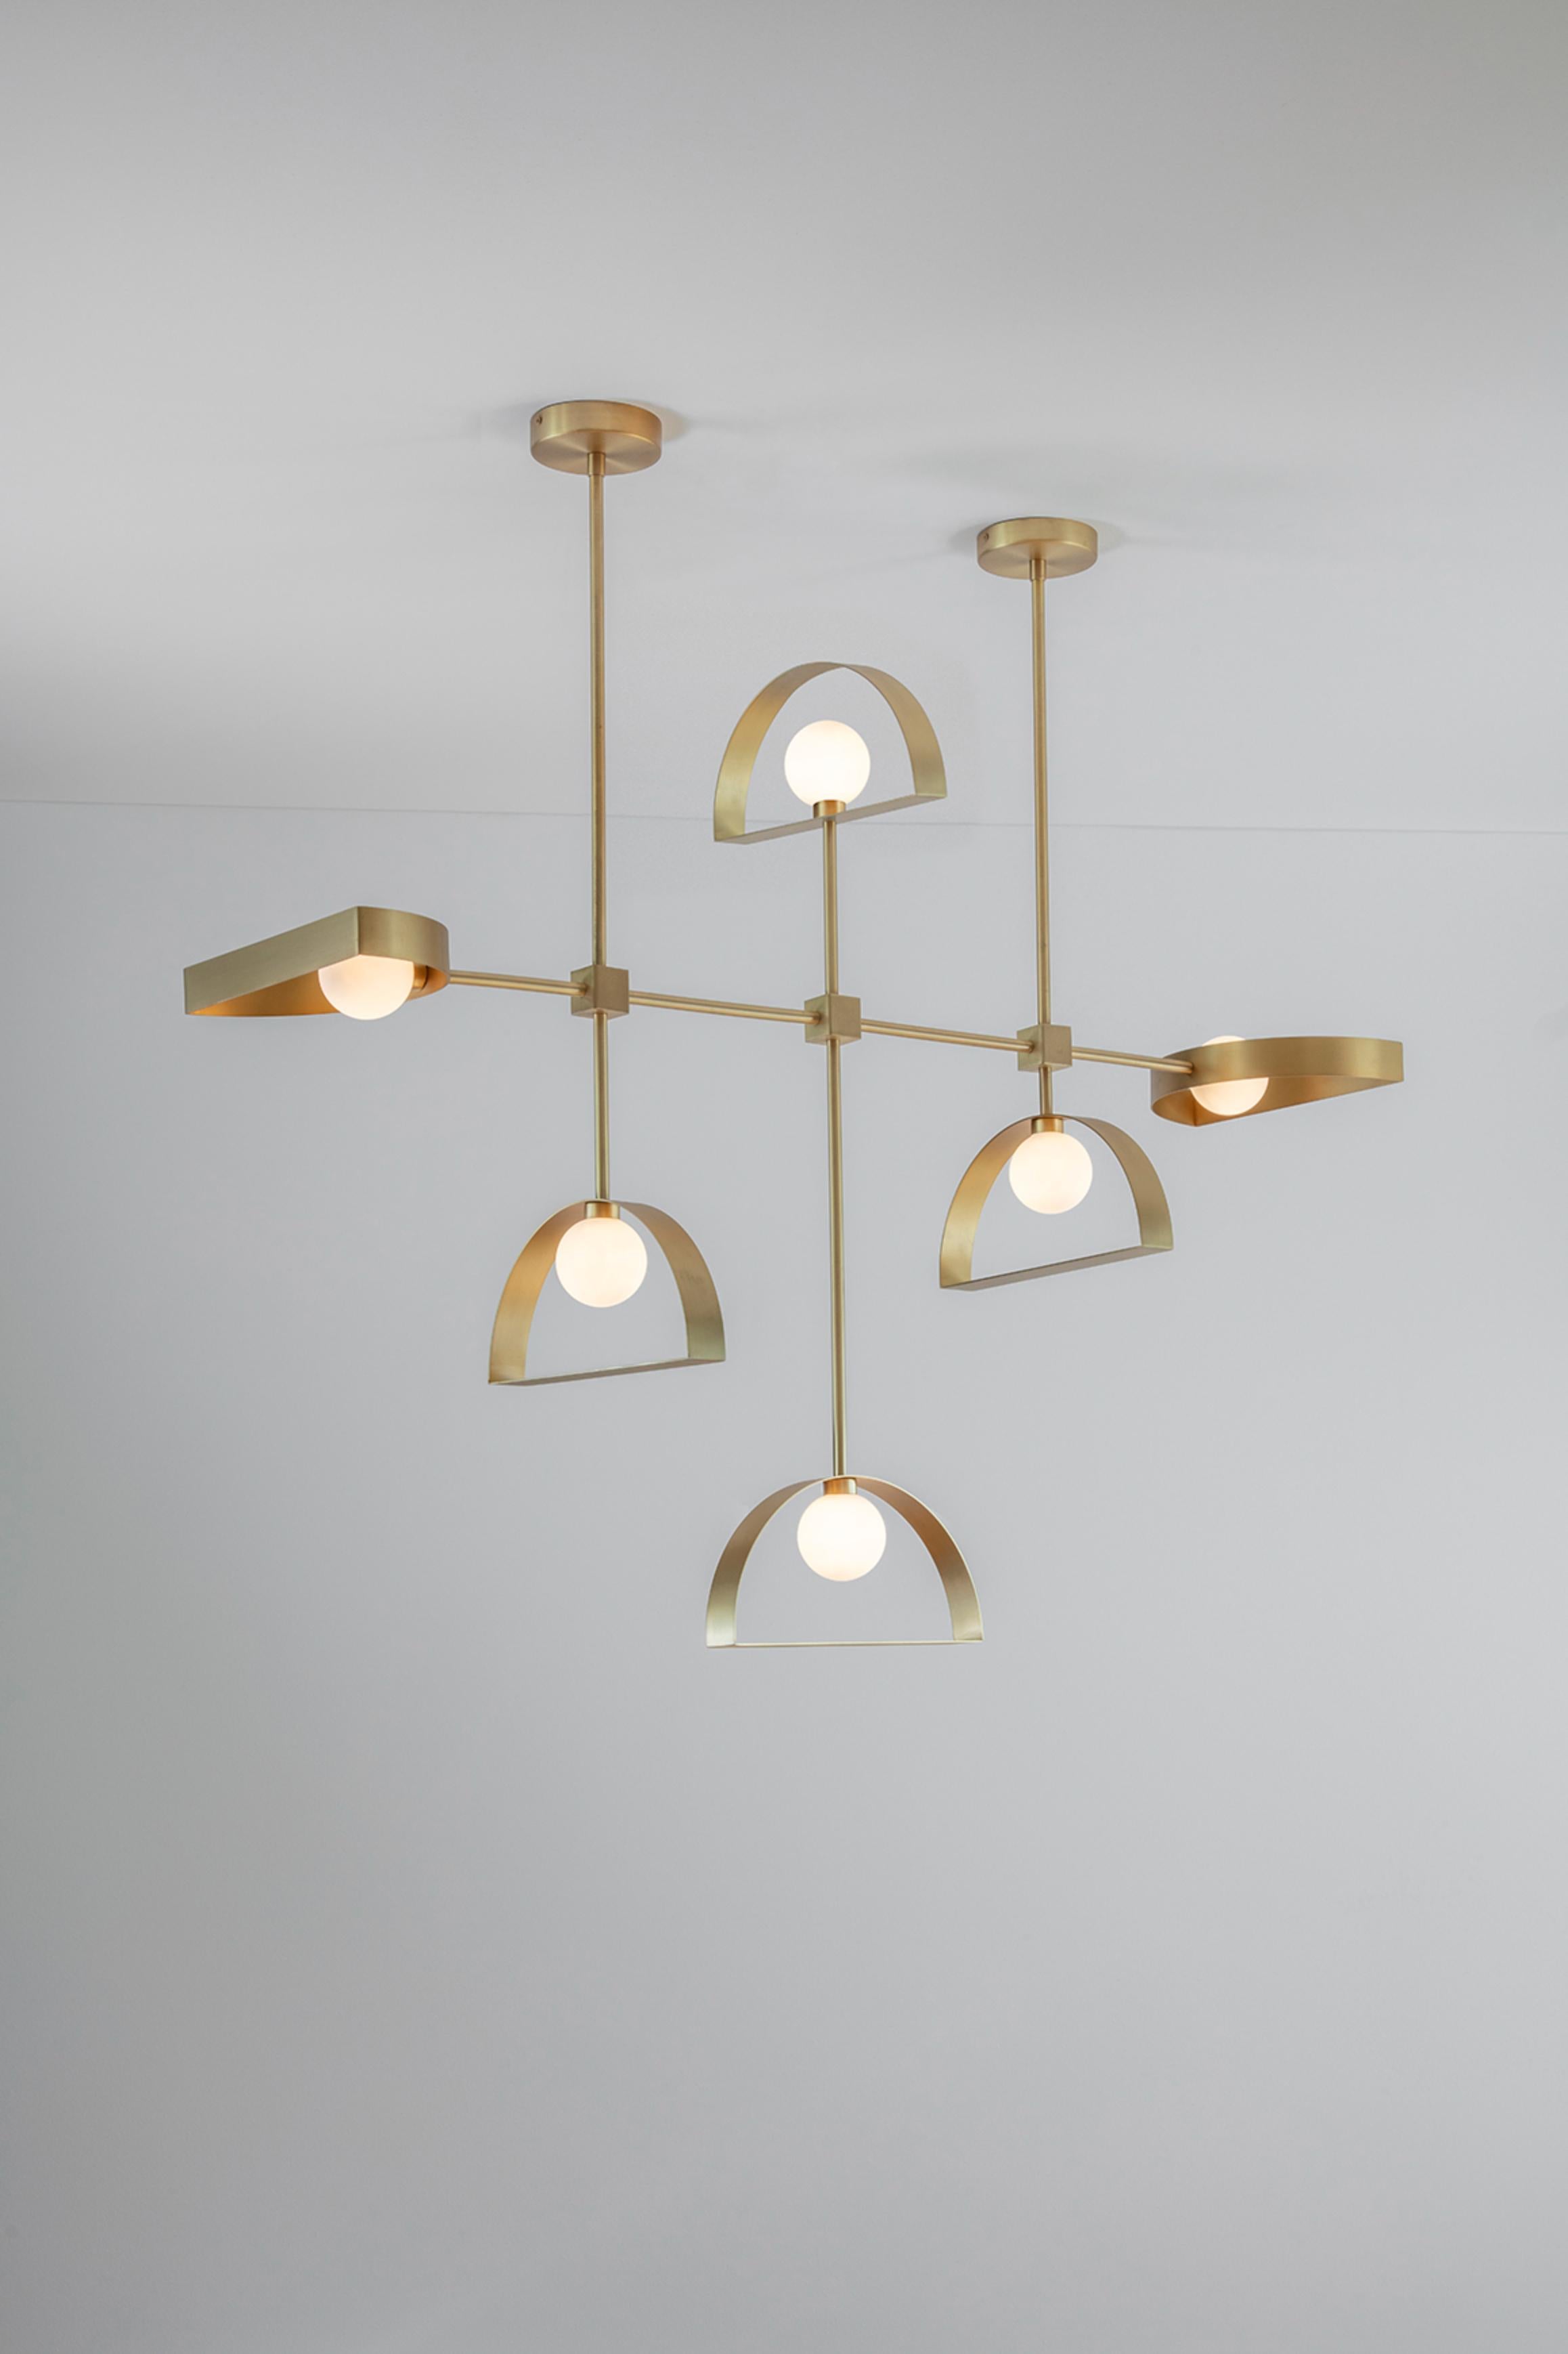 Brass Sphere and Cut Circle Pendant Lamp by Square in Circle
Dimensions: W 120 x H 120 x D 30 cm
Materials: Brushed brass finish, white frosted glass

This uniquely modular suspension light can be customized to different sizes and finishes. The